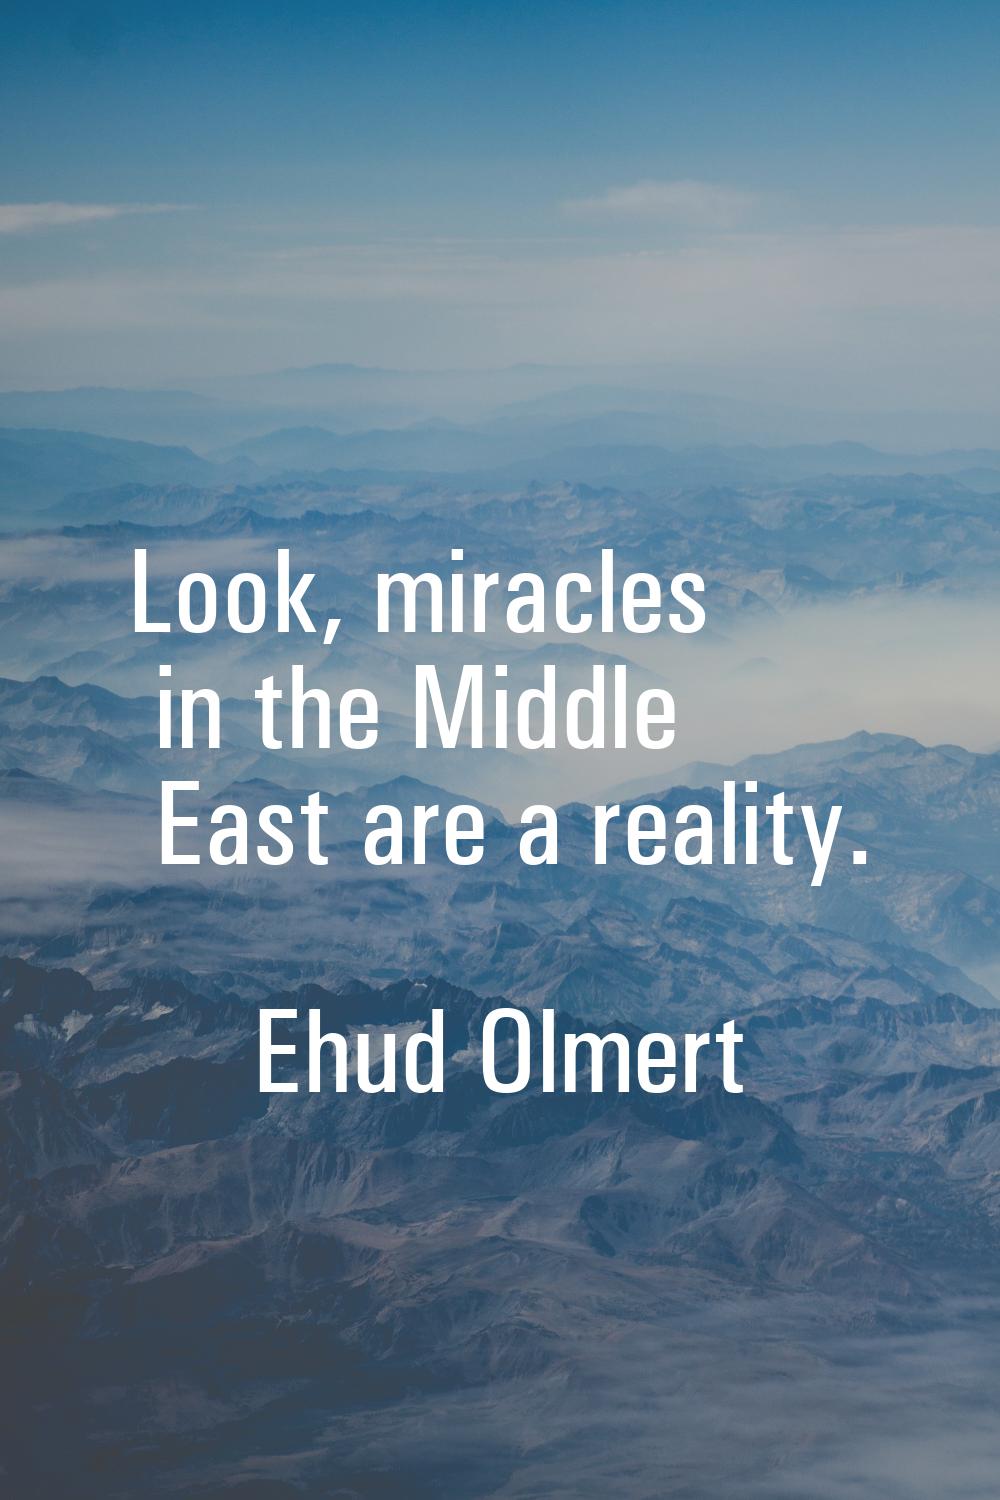 Look, miracles in the Middle East are a reality.